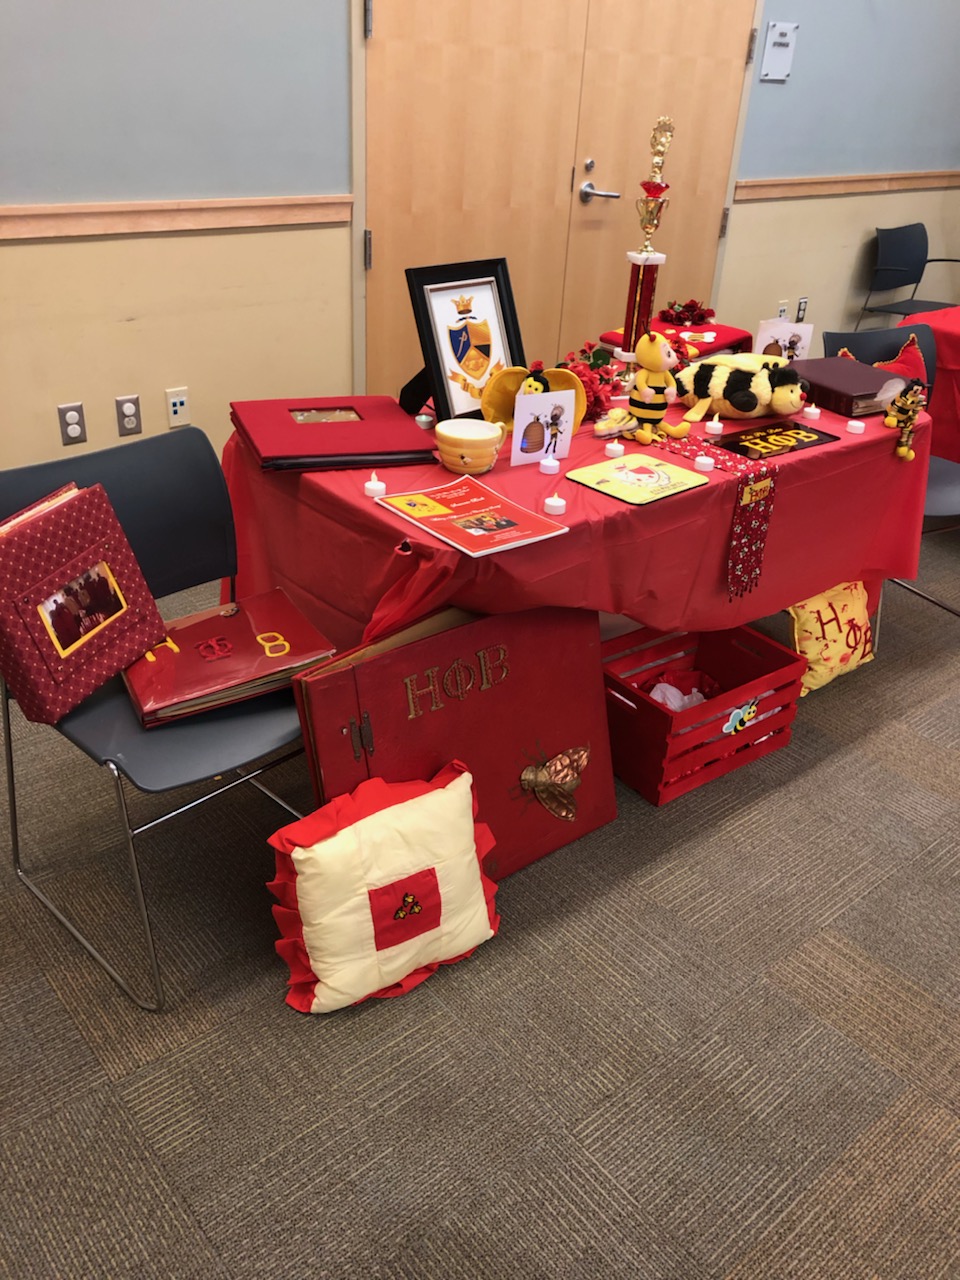  Alpha Theta Chapter’s Display Table at the January 2019 Interest Meeting 